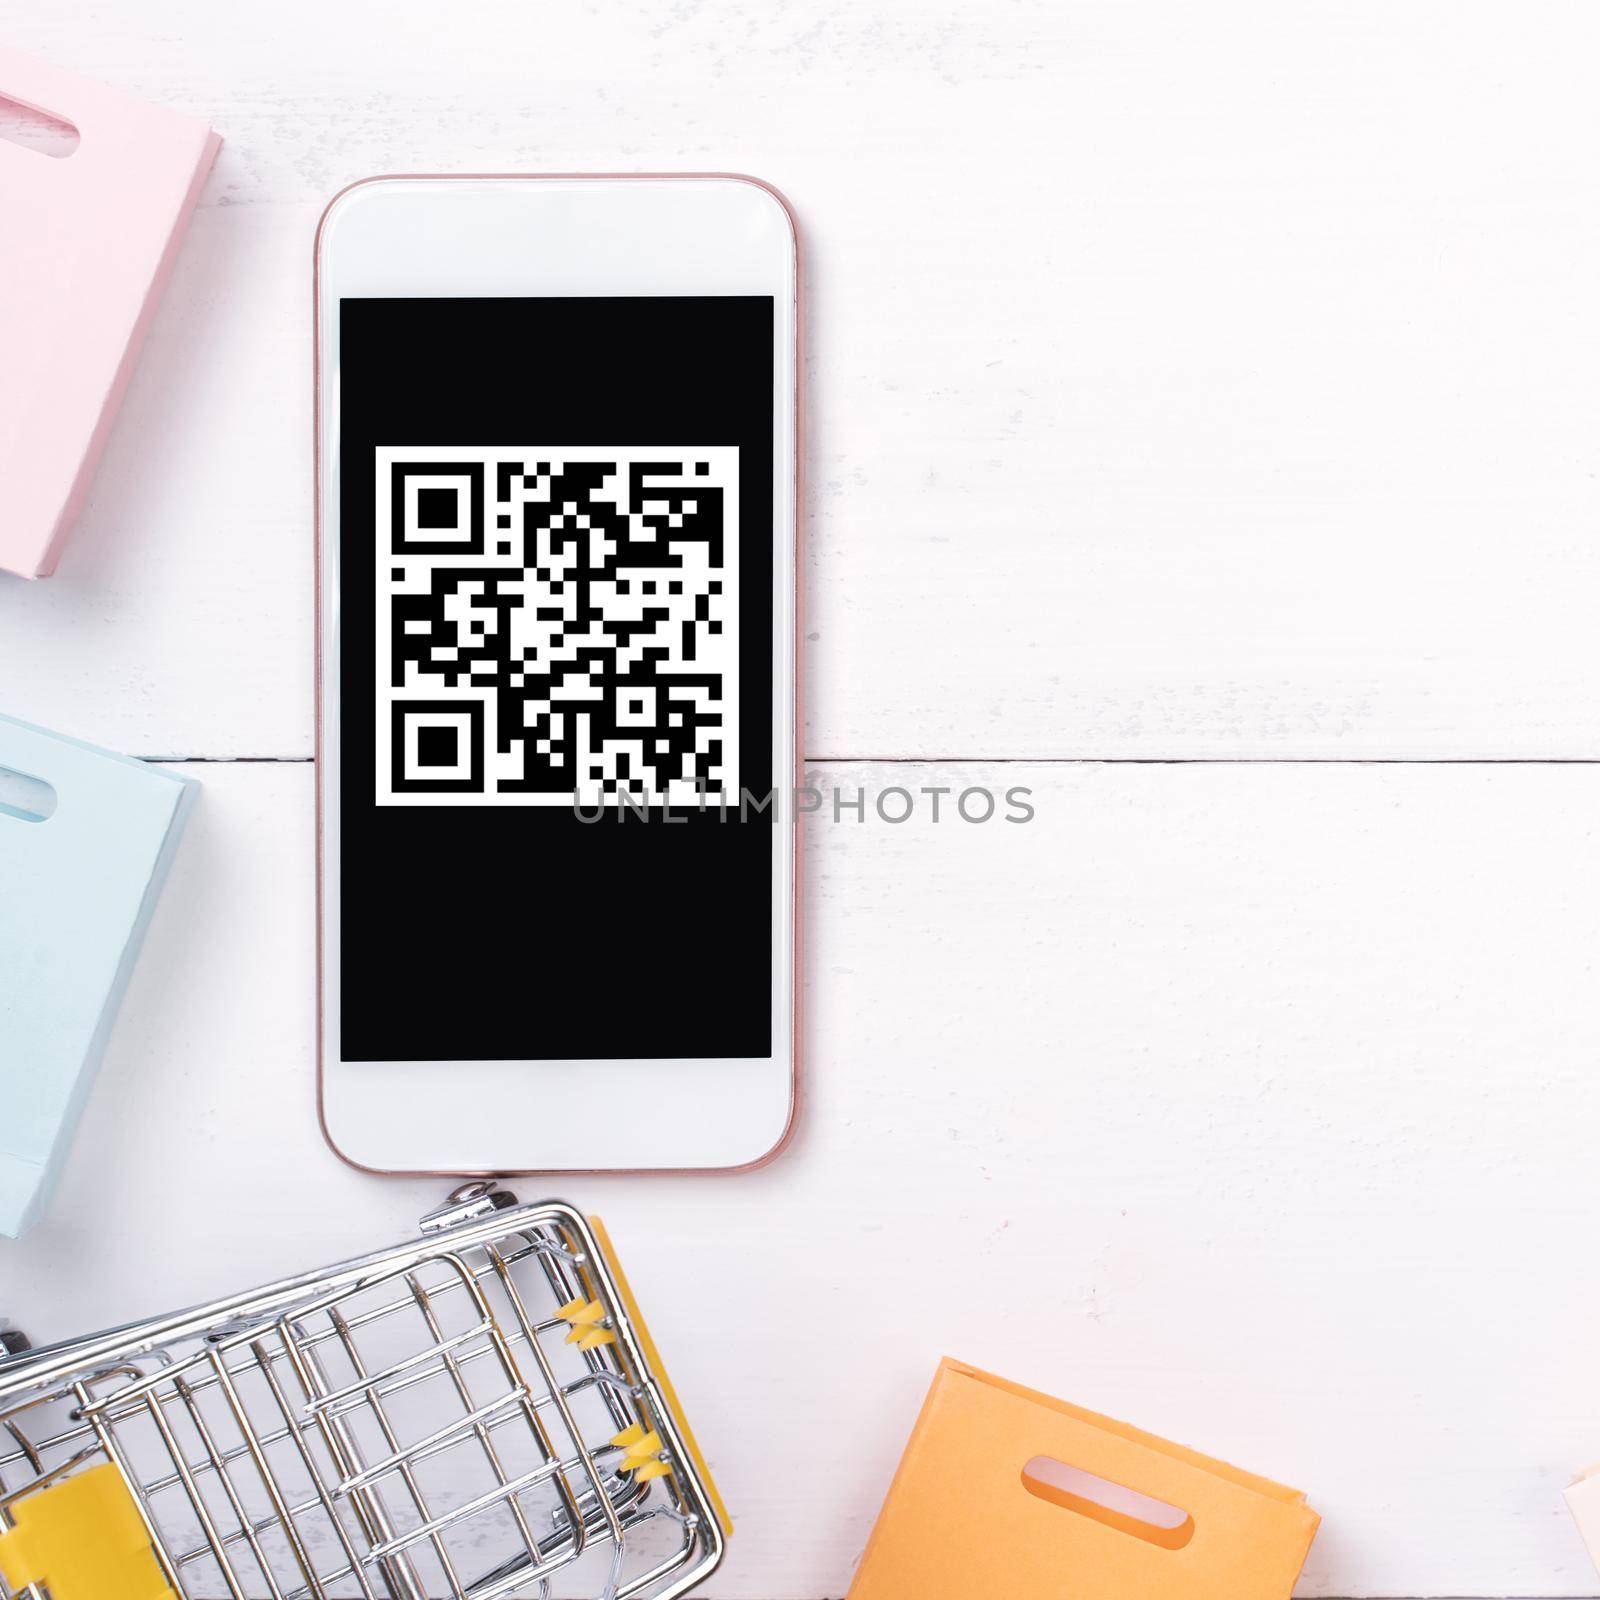 Abstract online shopping,mobile payment with QR code design concept element,colorful cart,paper bag on wooden table background,top view,flat lay